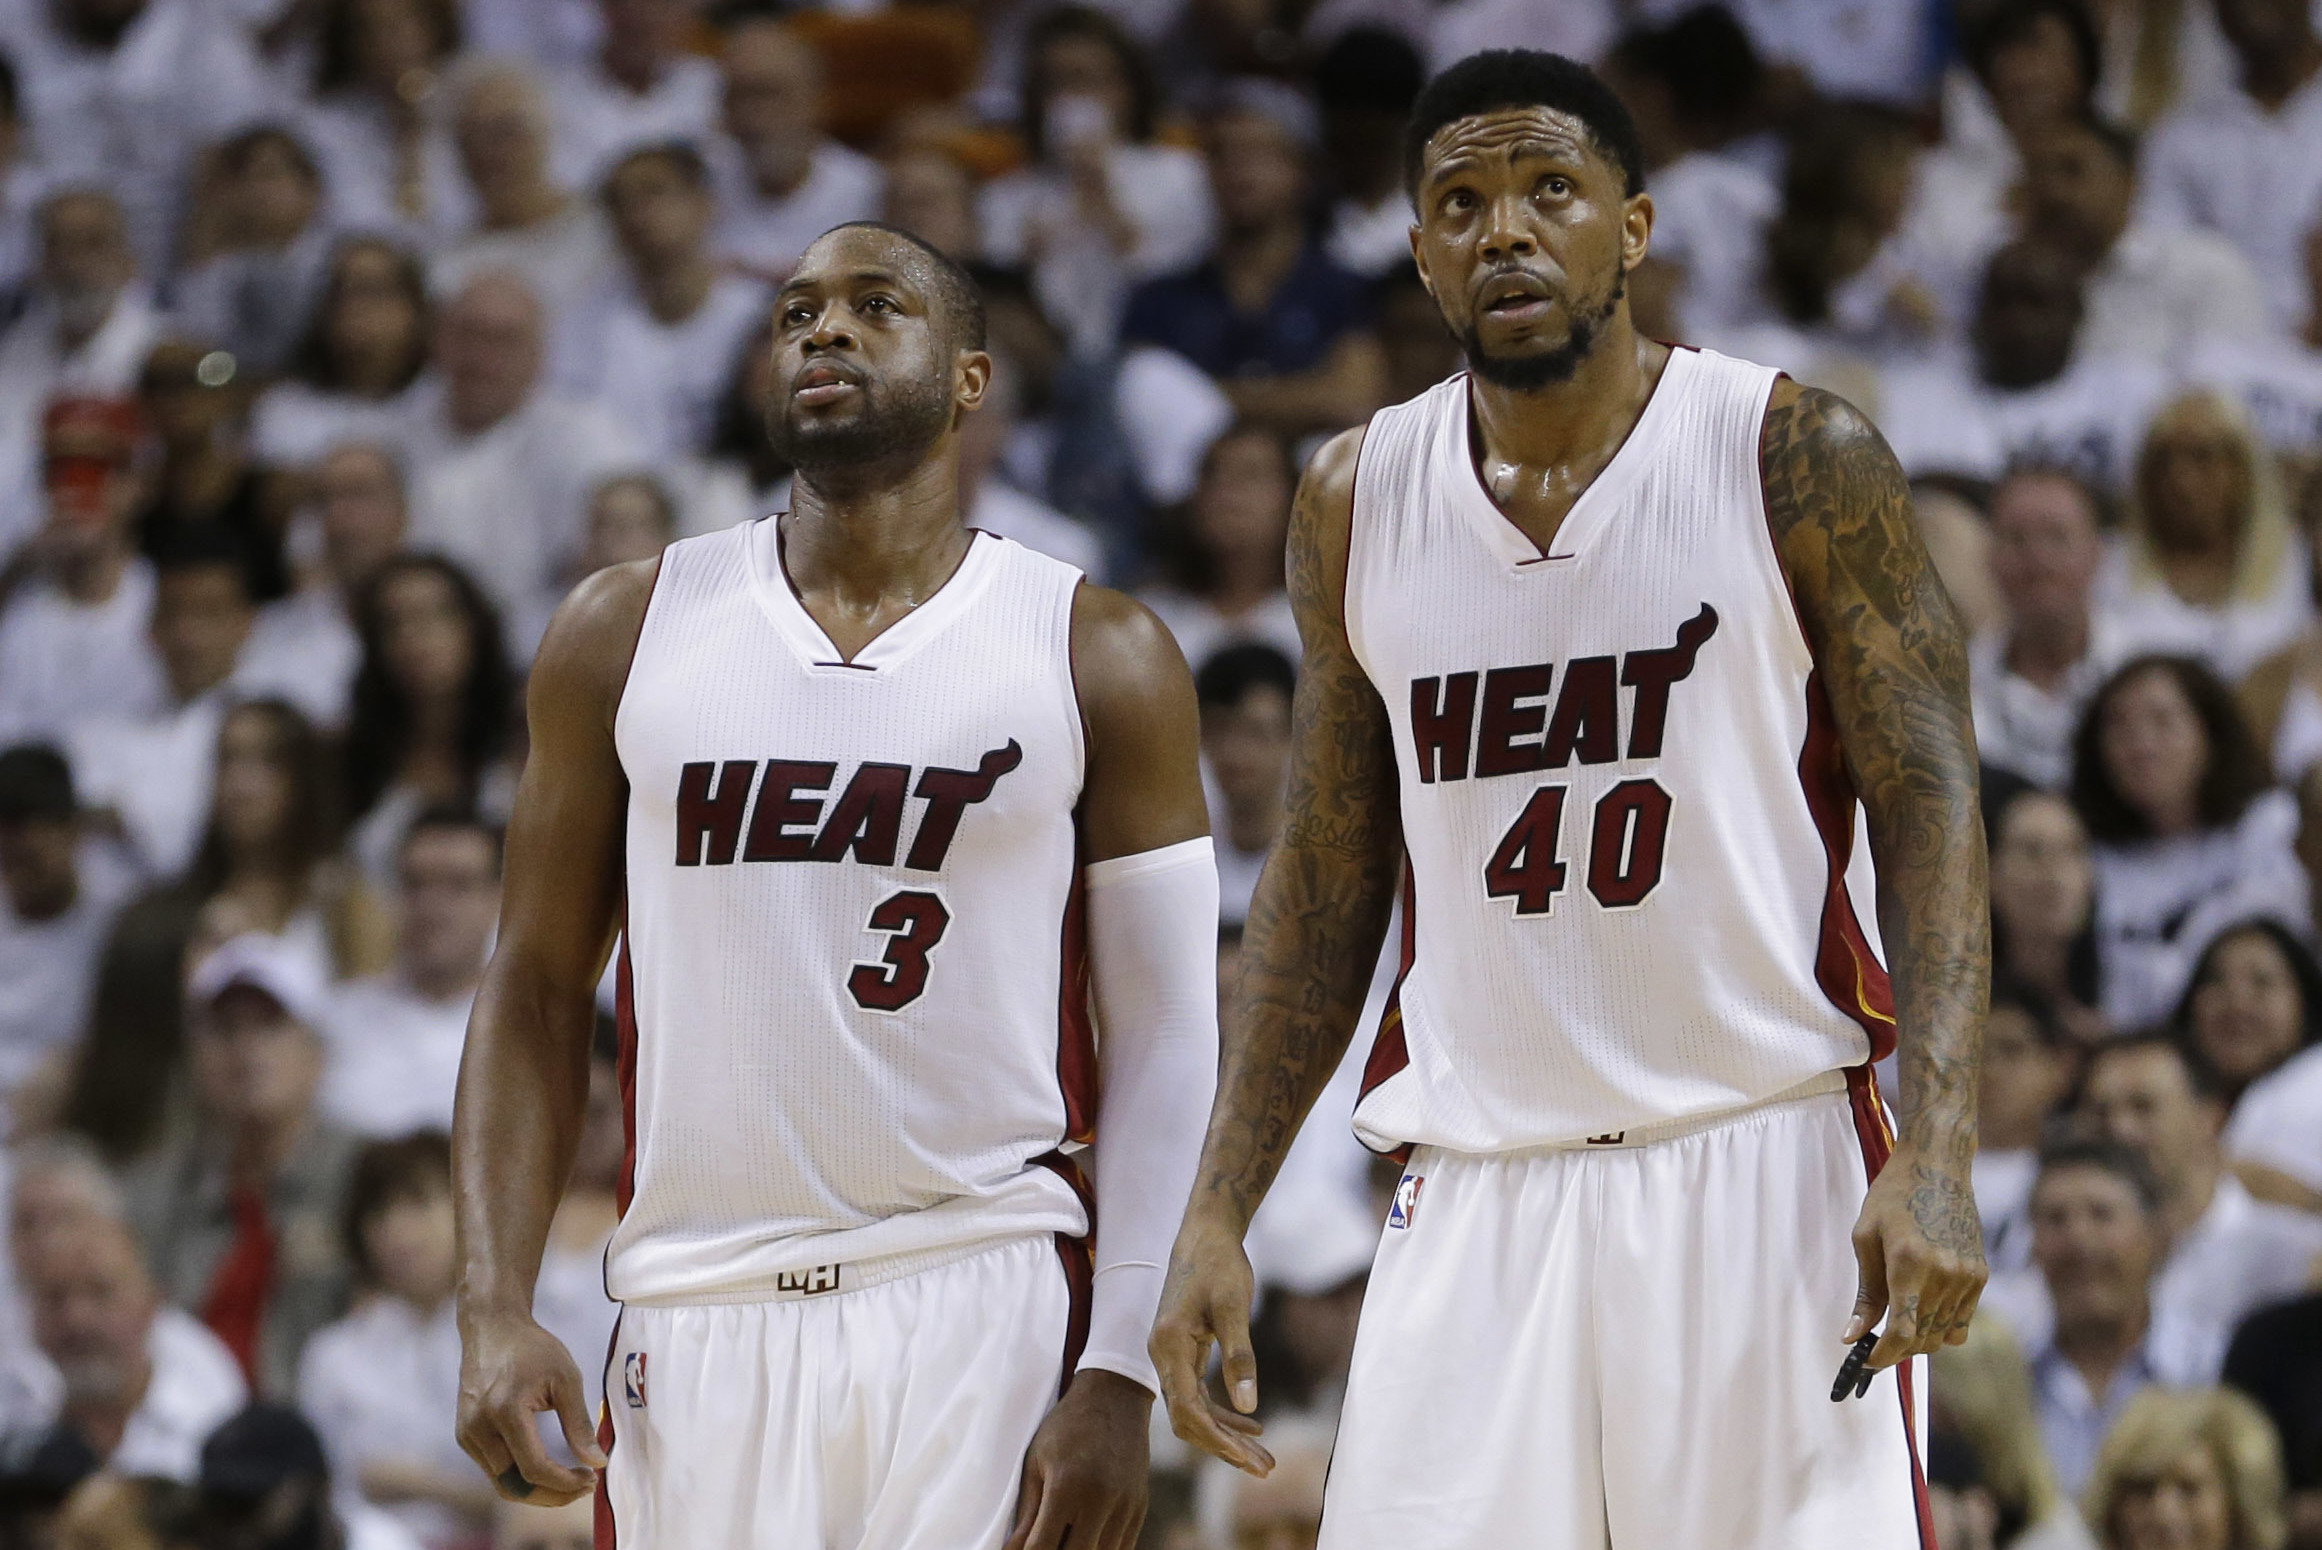 Udonis Haslem returning to Heat for 15th season